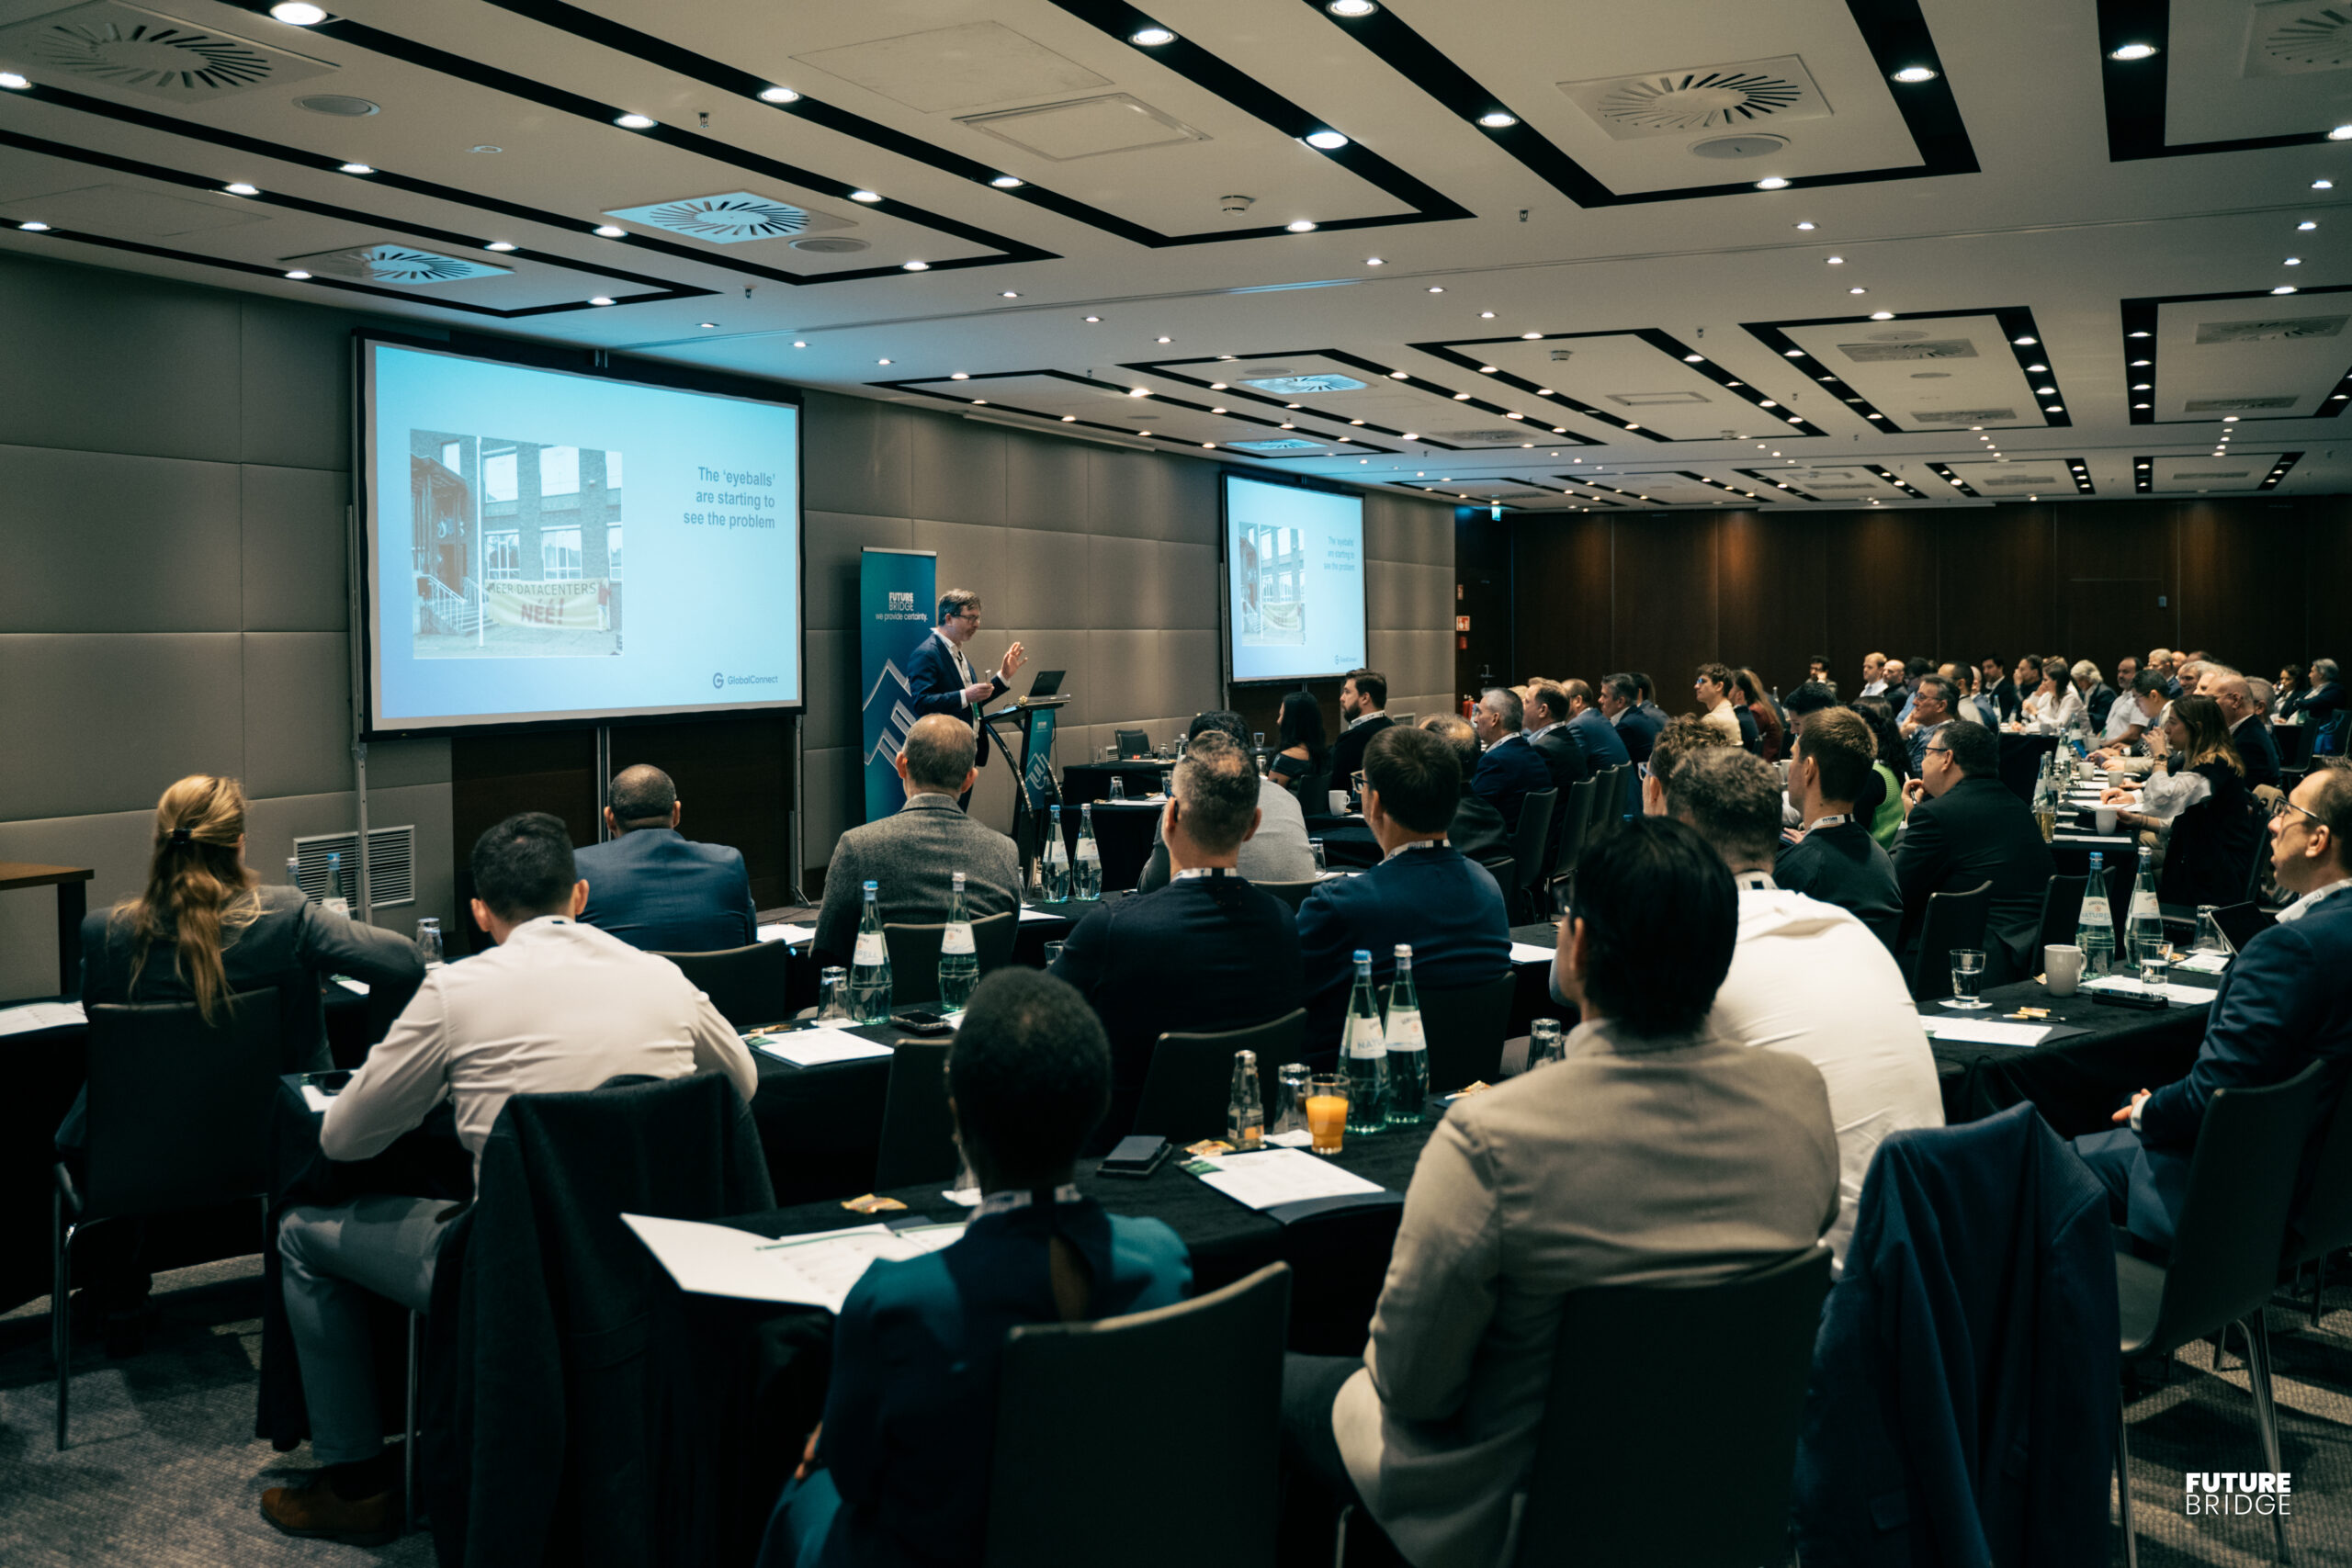 Net Zero Data Centre Summit - What Did the Event Cover?